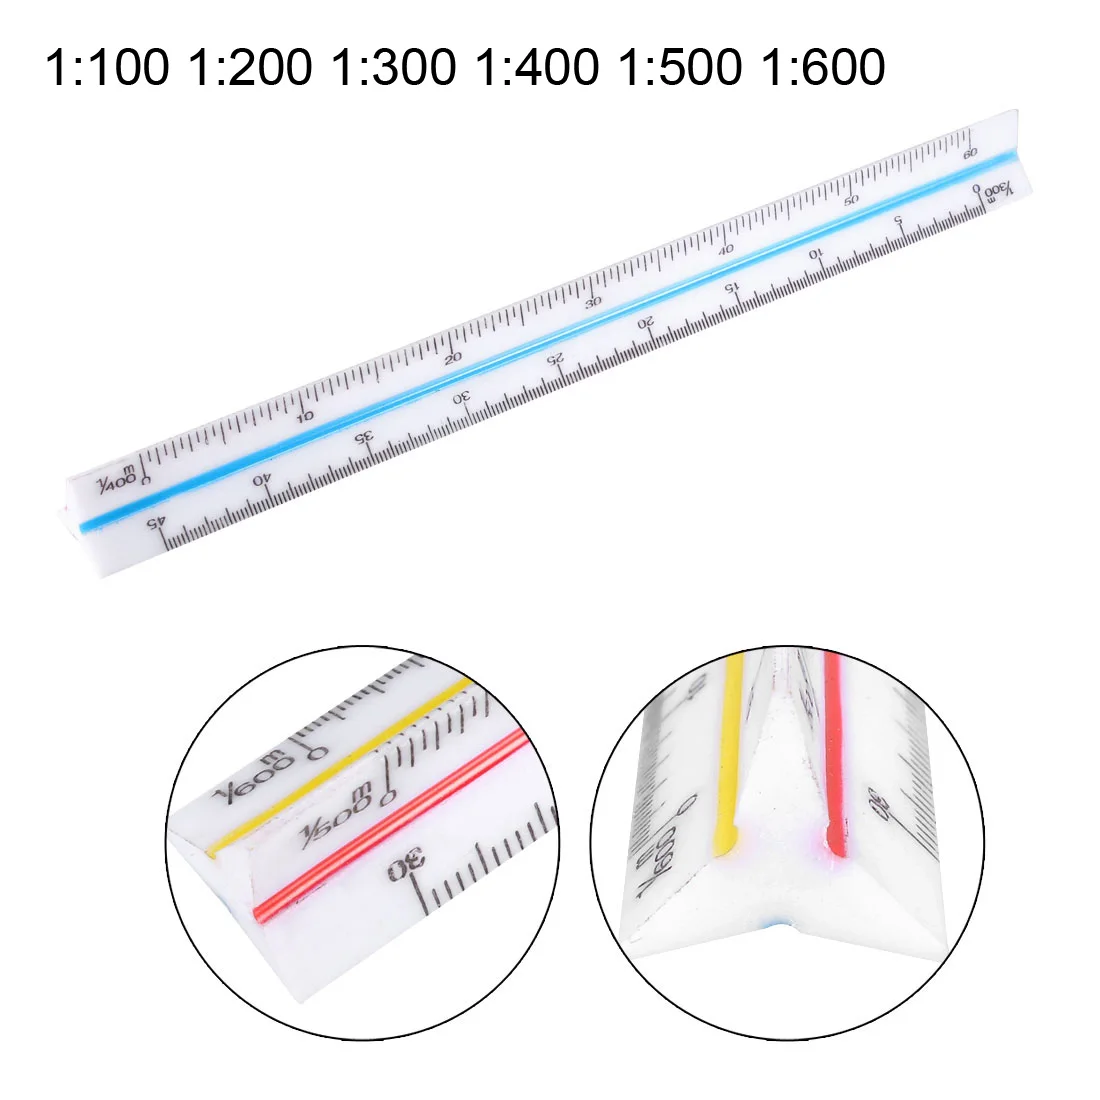 Triangular Scale Ruler 15cm Plastic Drafting Triangle Scale Architect Engineer Technical Ruler Stationery 1:100 - 1:600